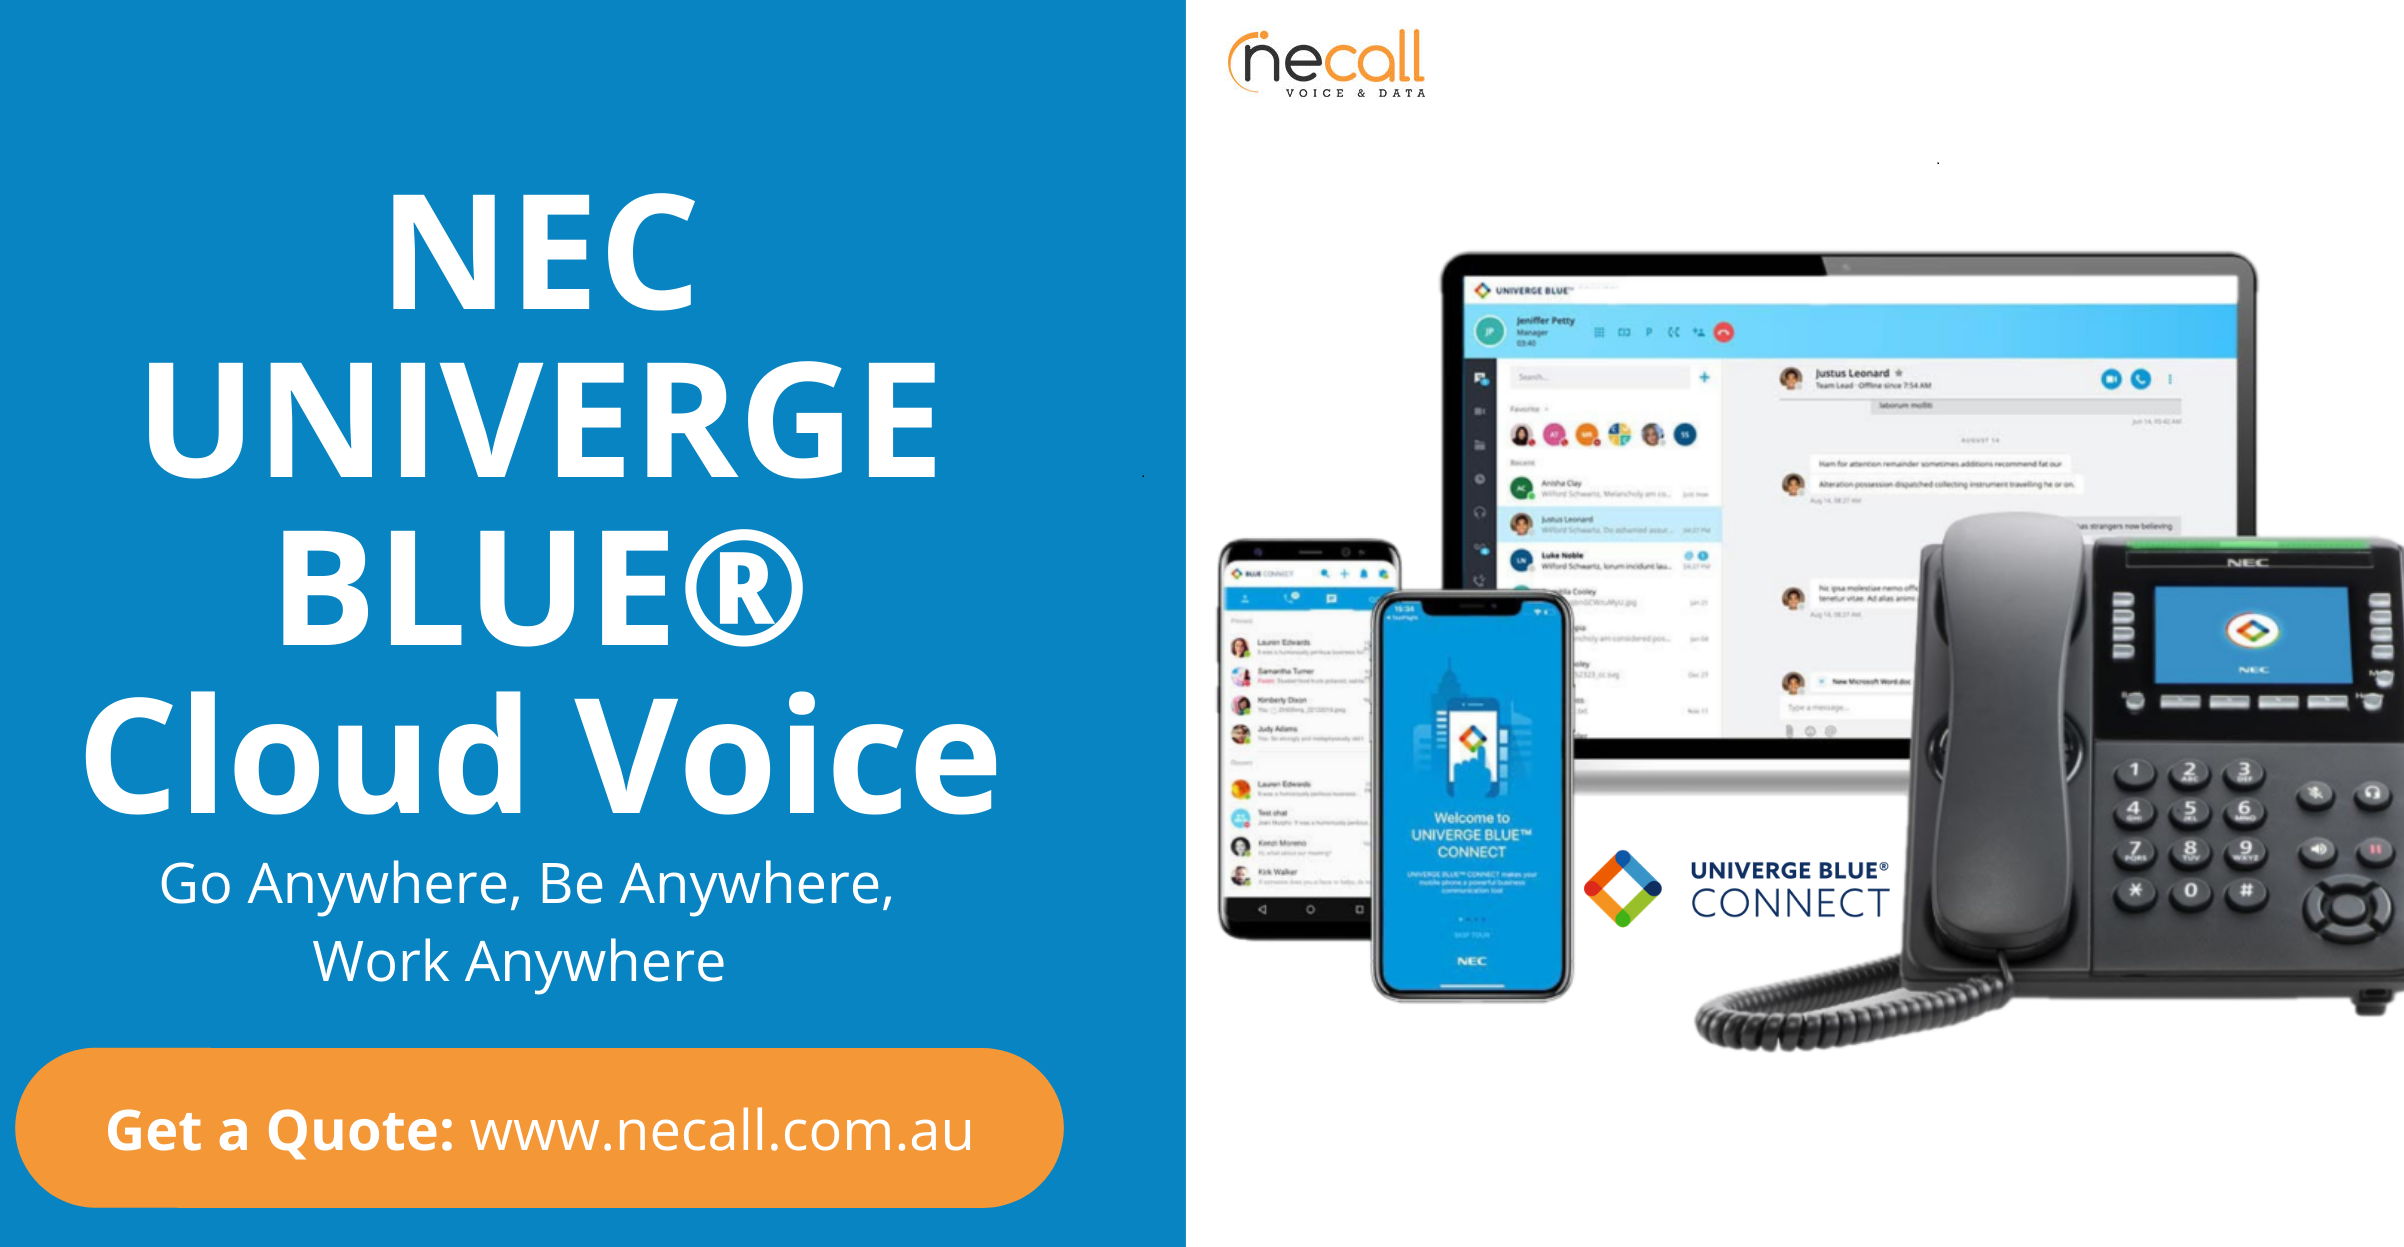 Scale New Heights with NEC Univerge Blue Cloud Voice